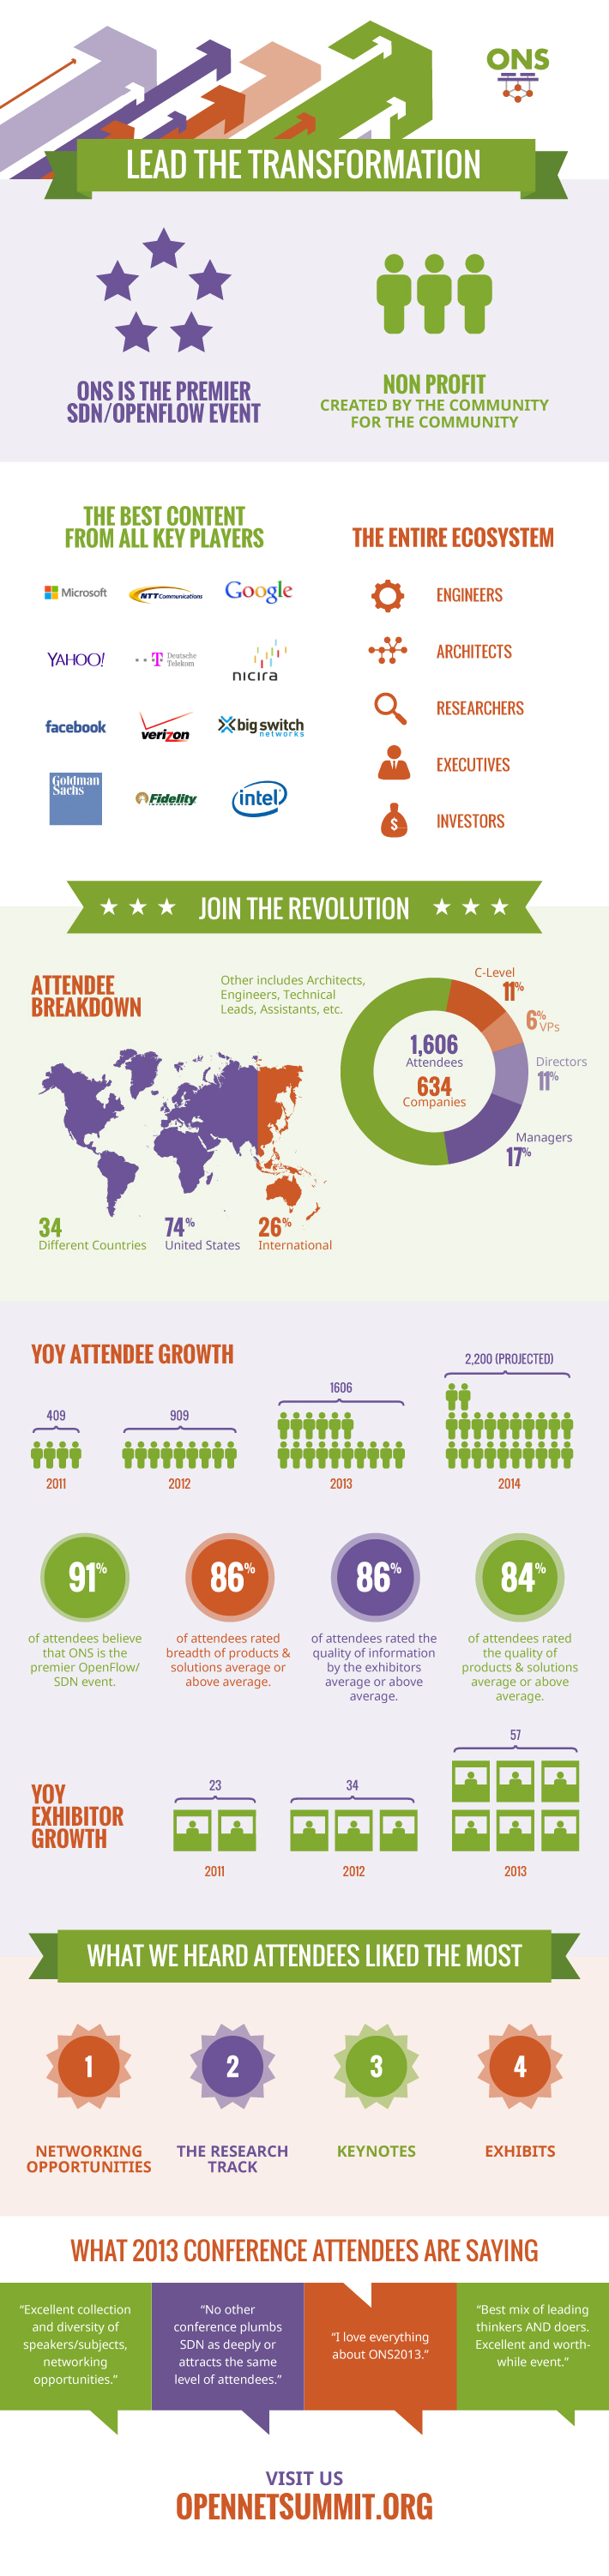 Open Networking Summit Infographic